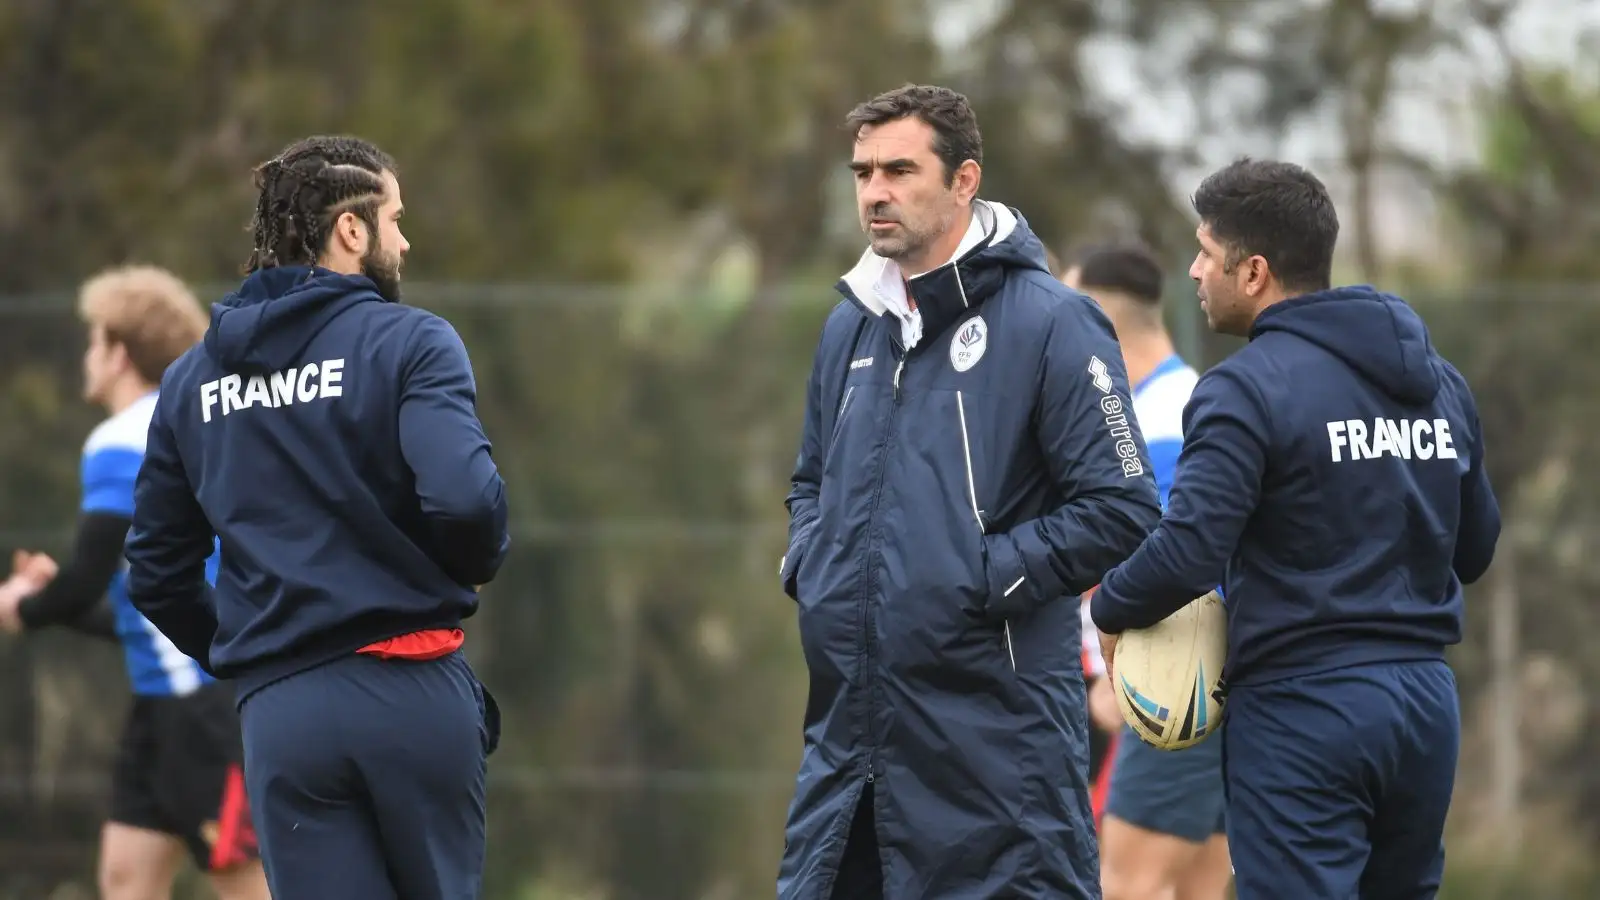 France name initial squad for mid-season England test